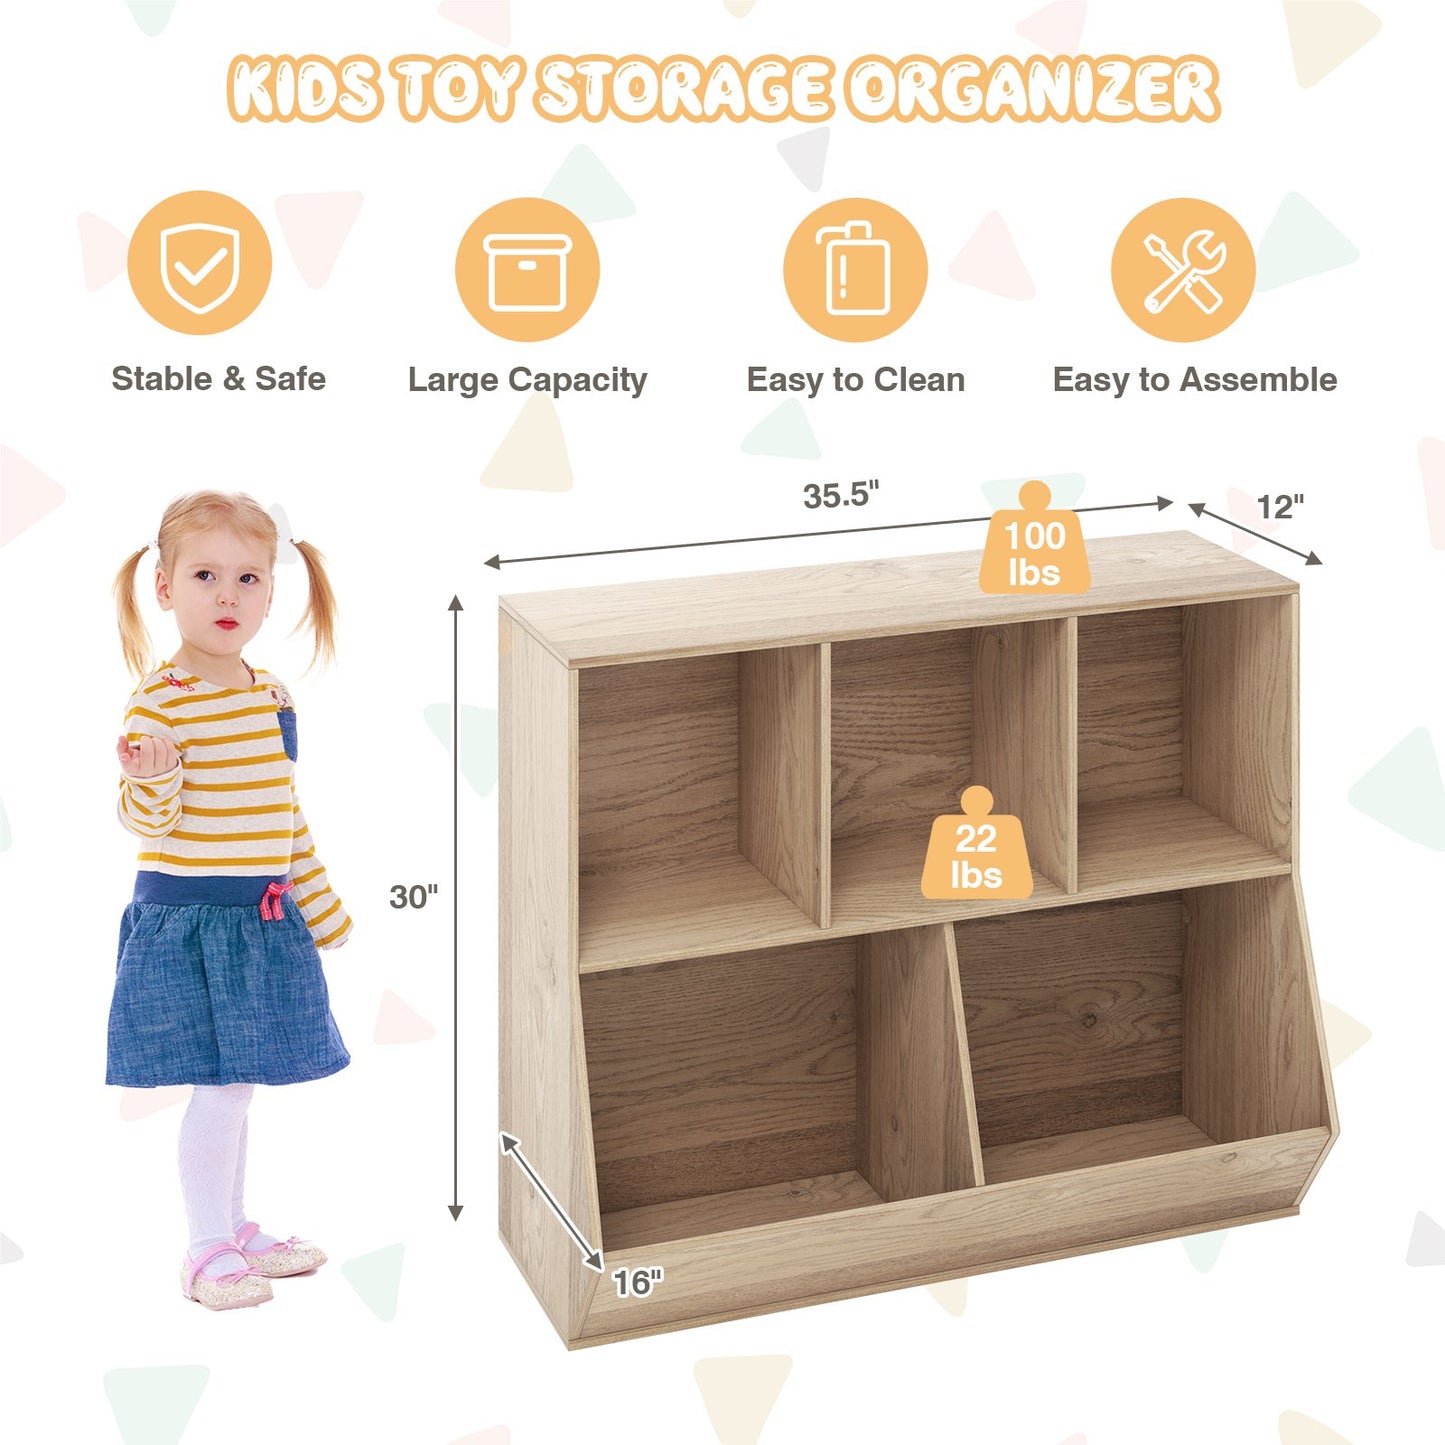 5-Cube Wooden Kids Toy Storage Organizer with Anti-Tipping Kits, Natural